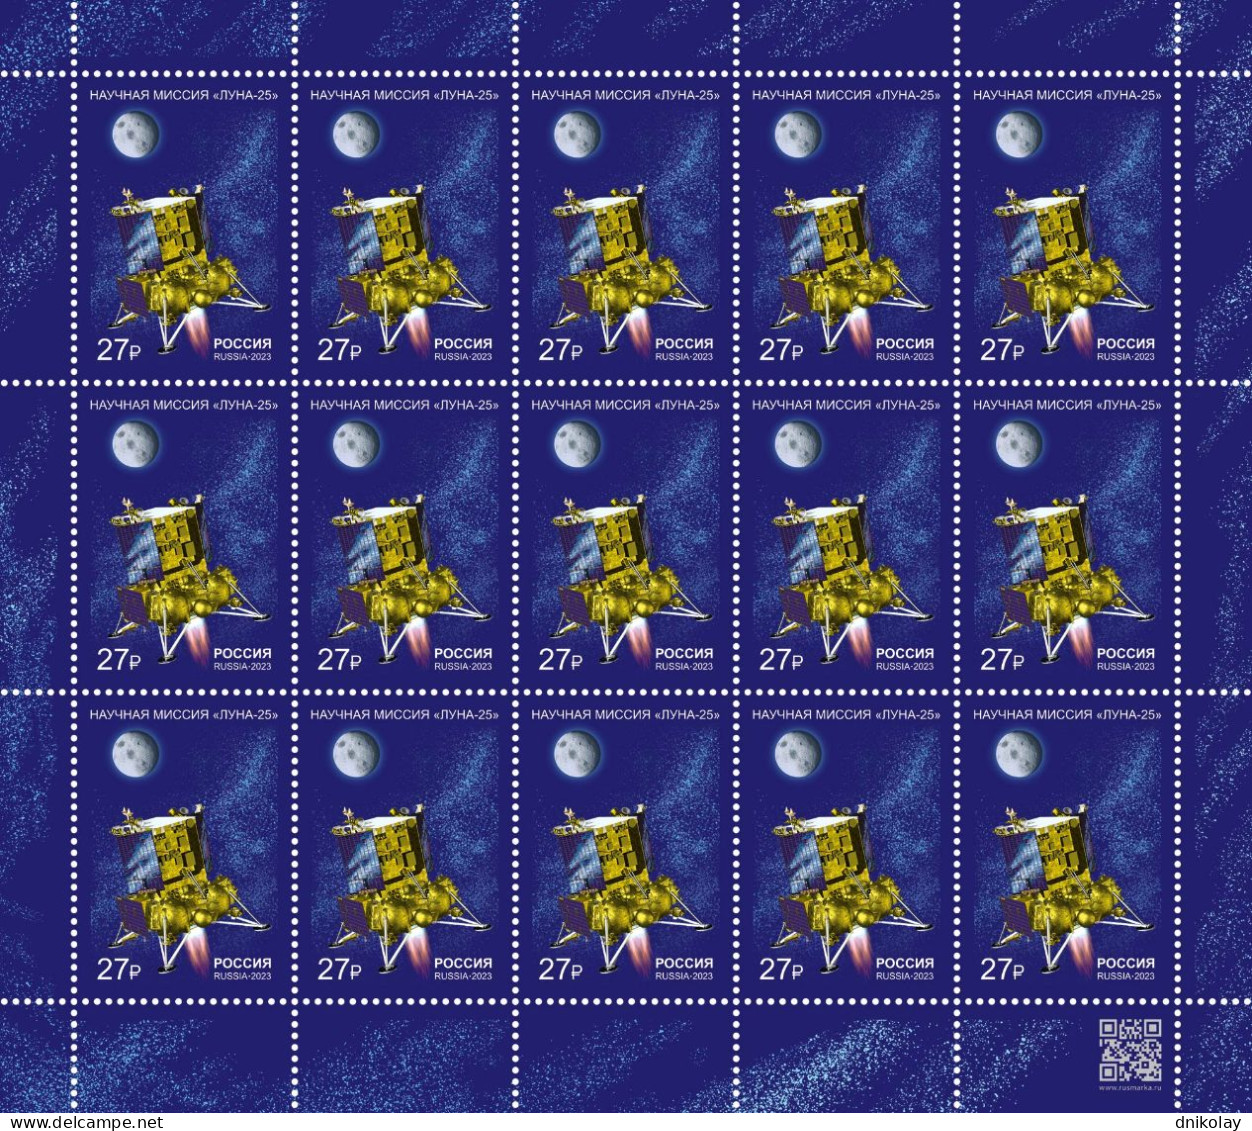 2023 3383 Russia Space Projects Of Russia - Scientific Mission Of Luna-25 MNH - Nuevos